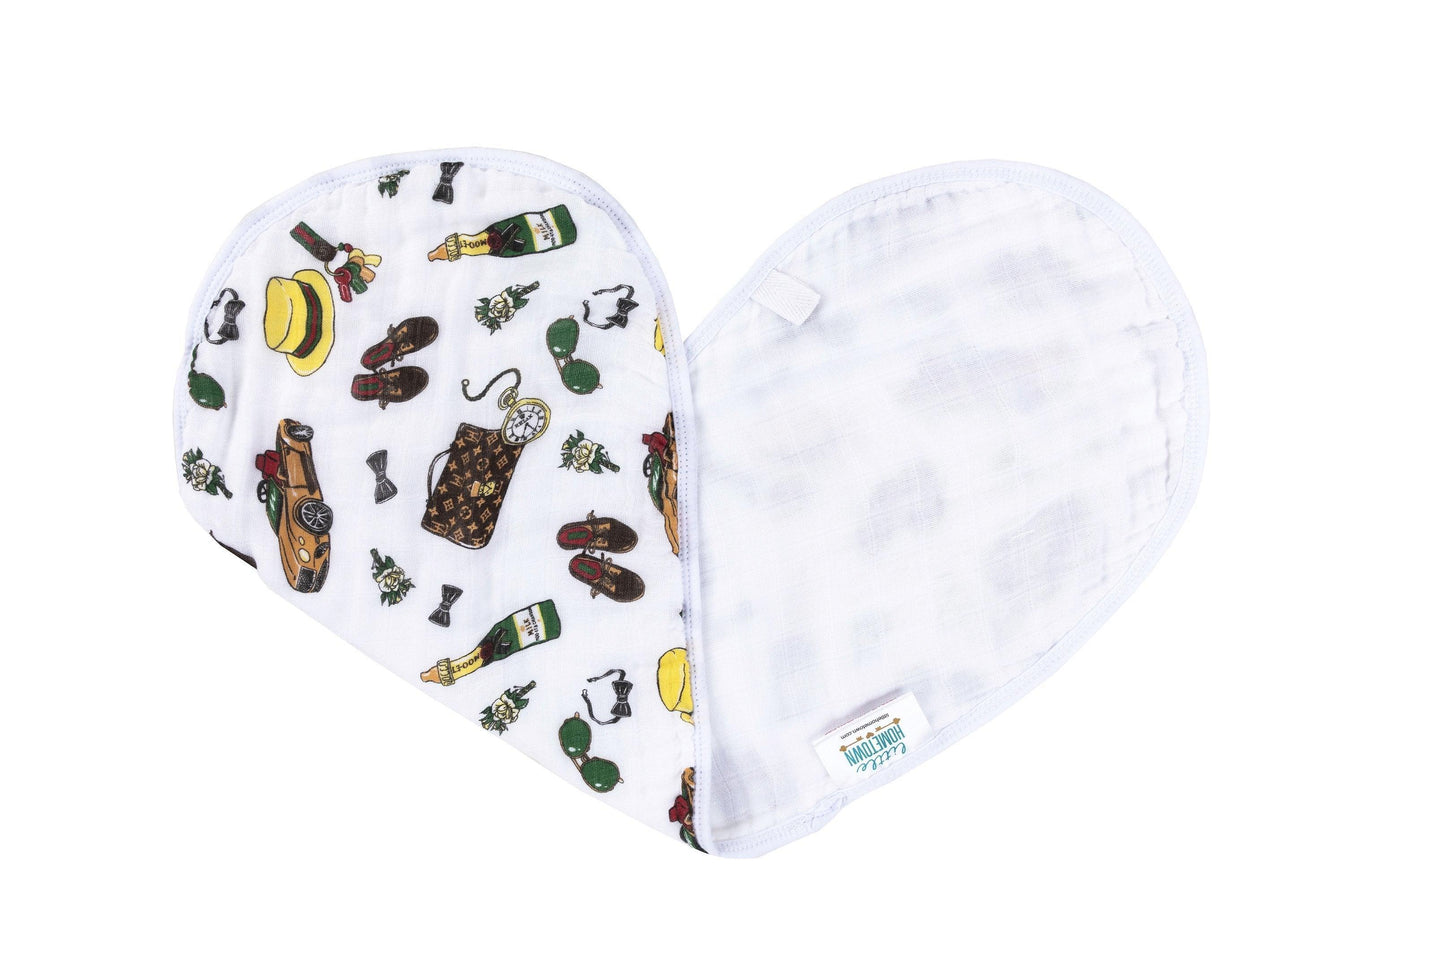 Baby bib and burp cloth set with a dapper napper design, featuring bow ties and mustaches on a white background.